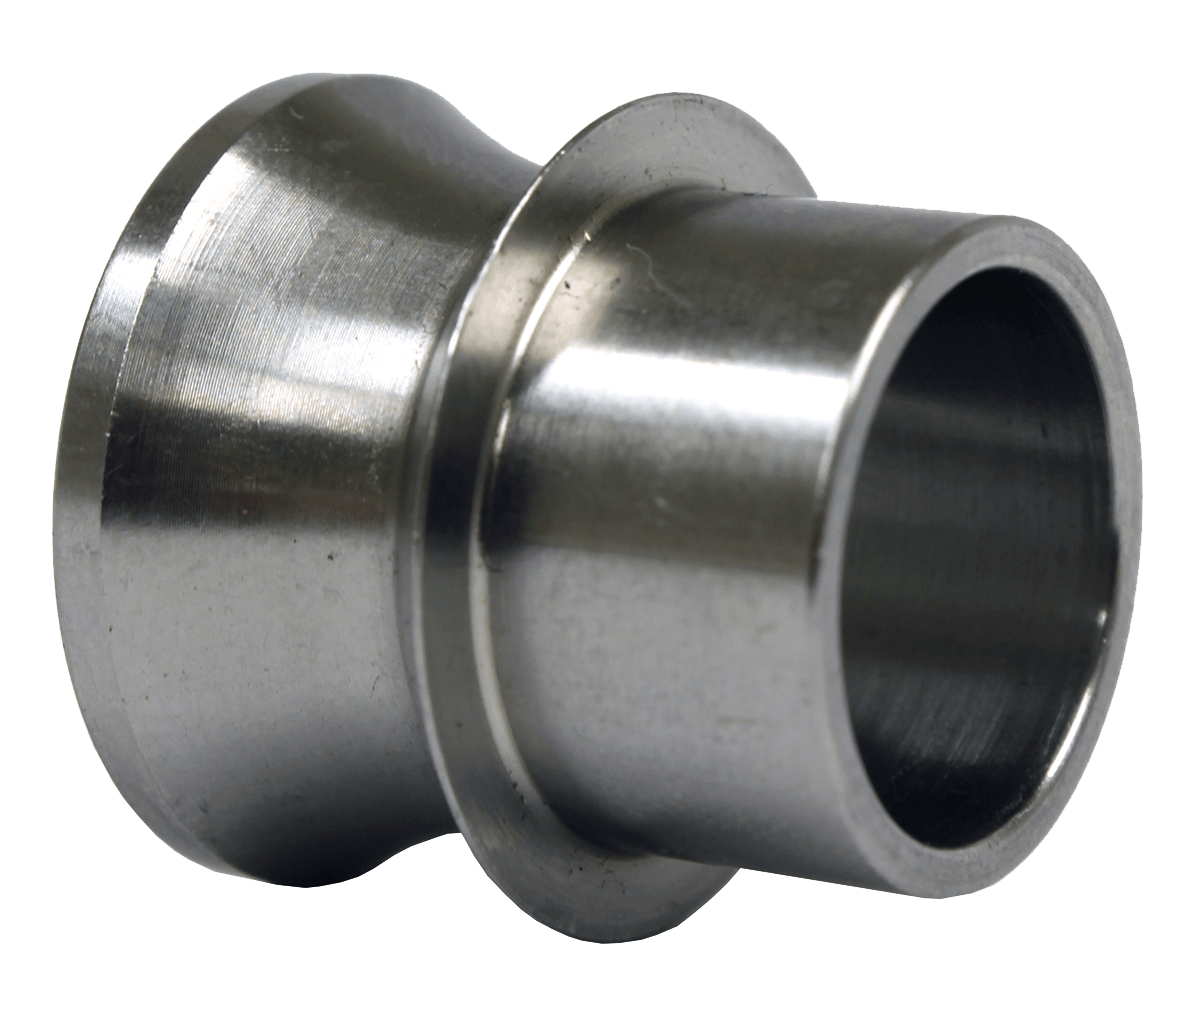 QA1 SN10-67 High Misalignment Spacer, .625 inch Od Ss, .375 inch X 1.5 inch Total Width